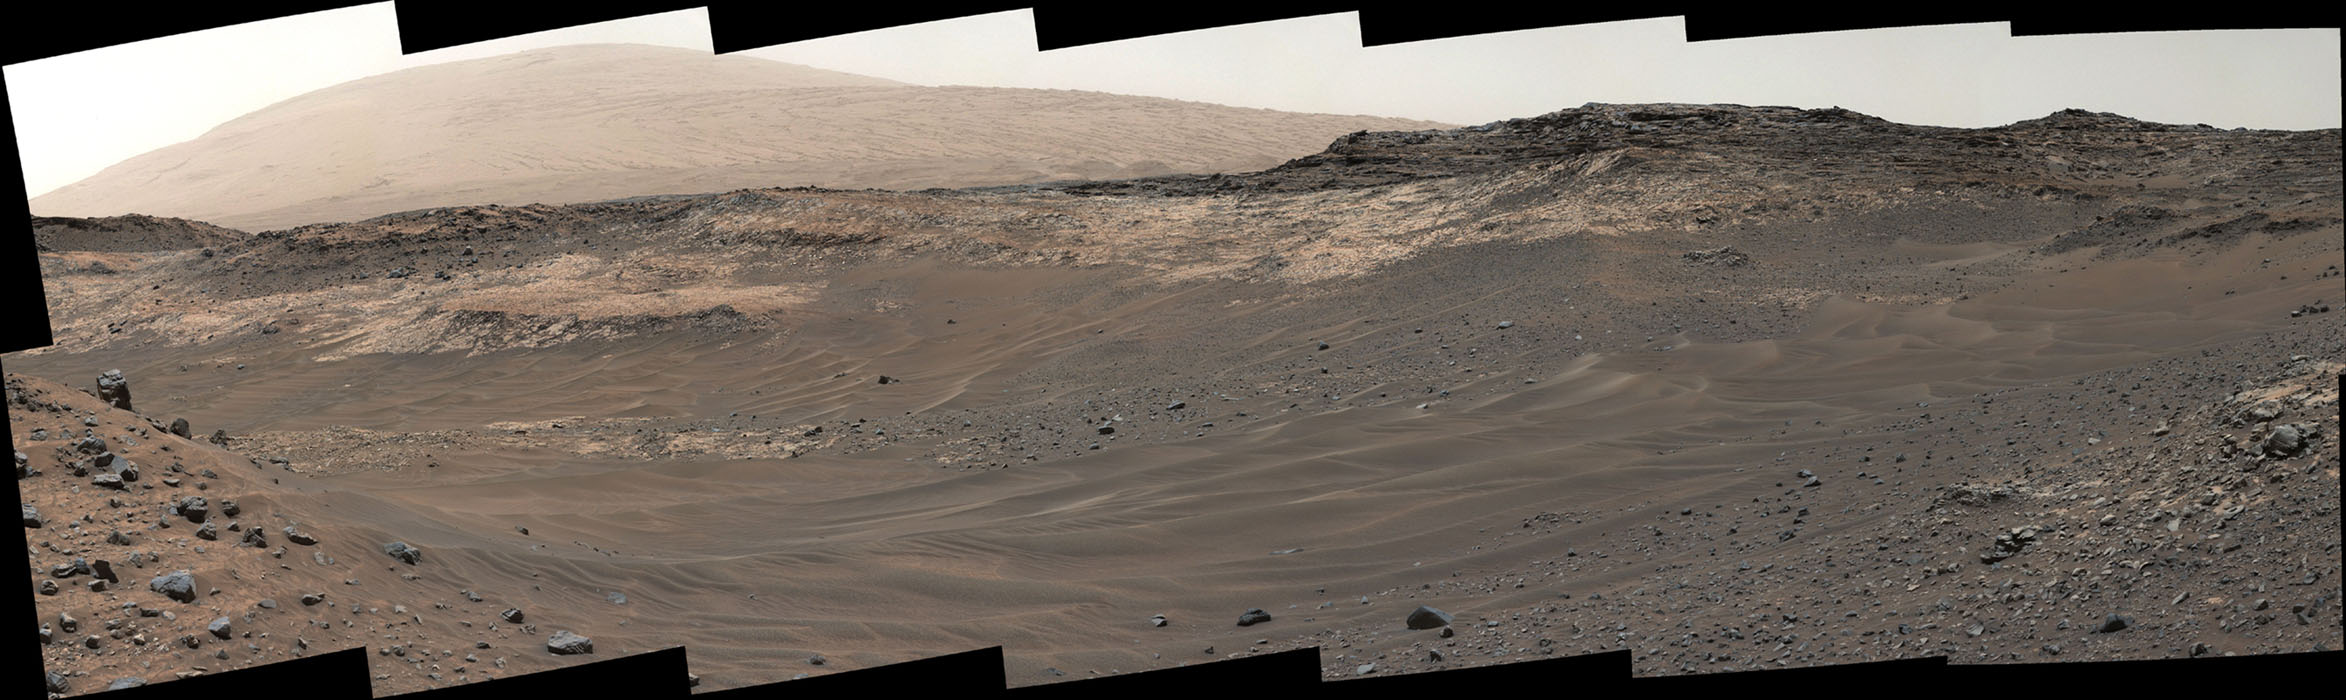 This view southeastward from Curiosity's Mast Camera (Mastcam) shows terrain judged difficult for traversing between the rover and an outcrop in the middle distance where a pale rock unit meets a darker rock unit above it.